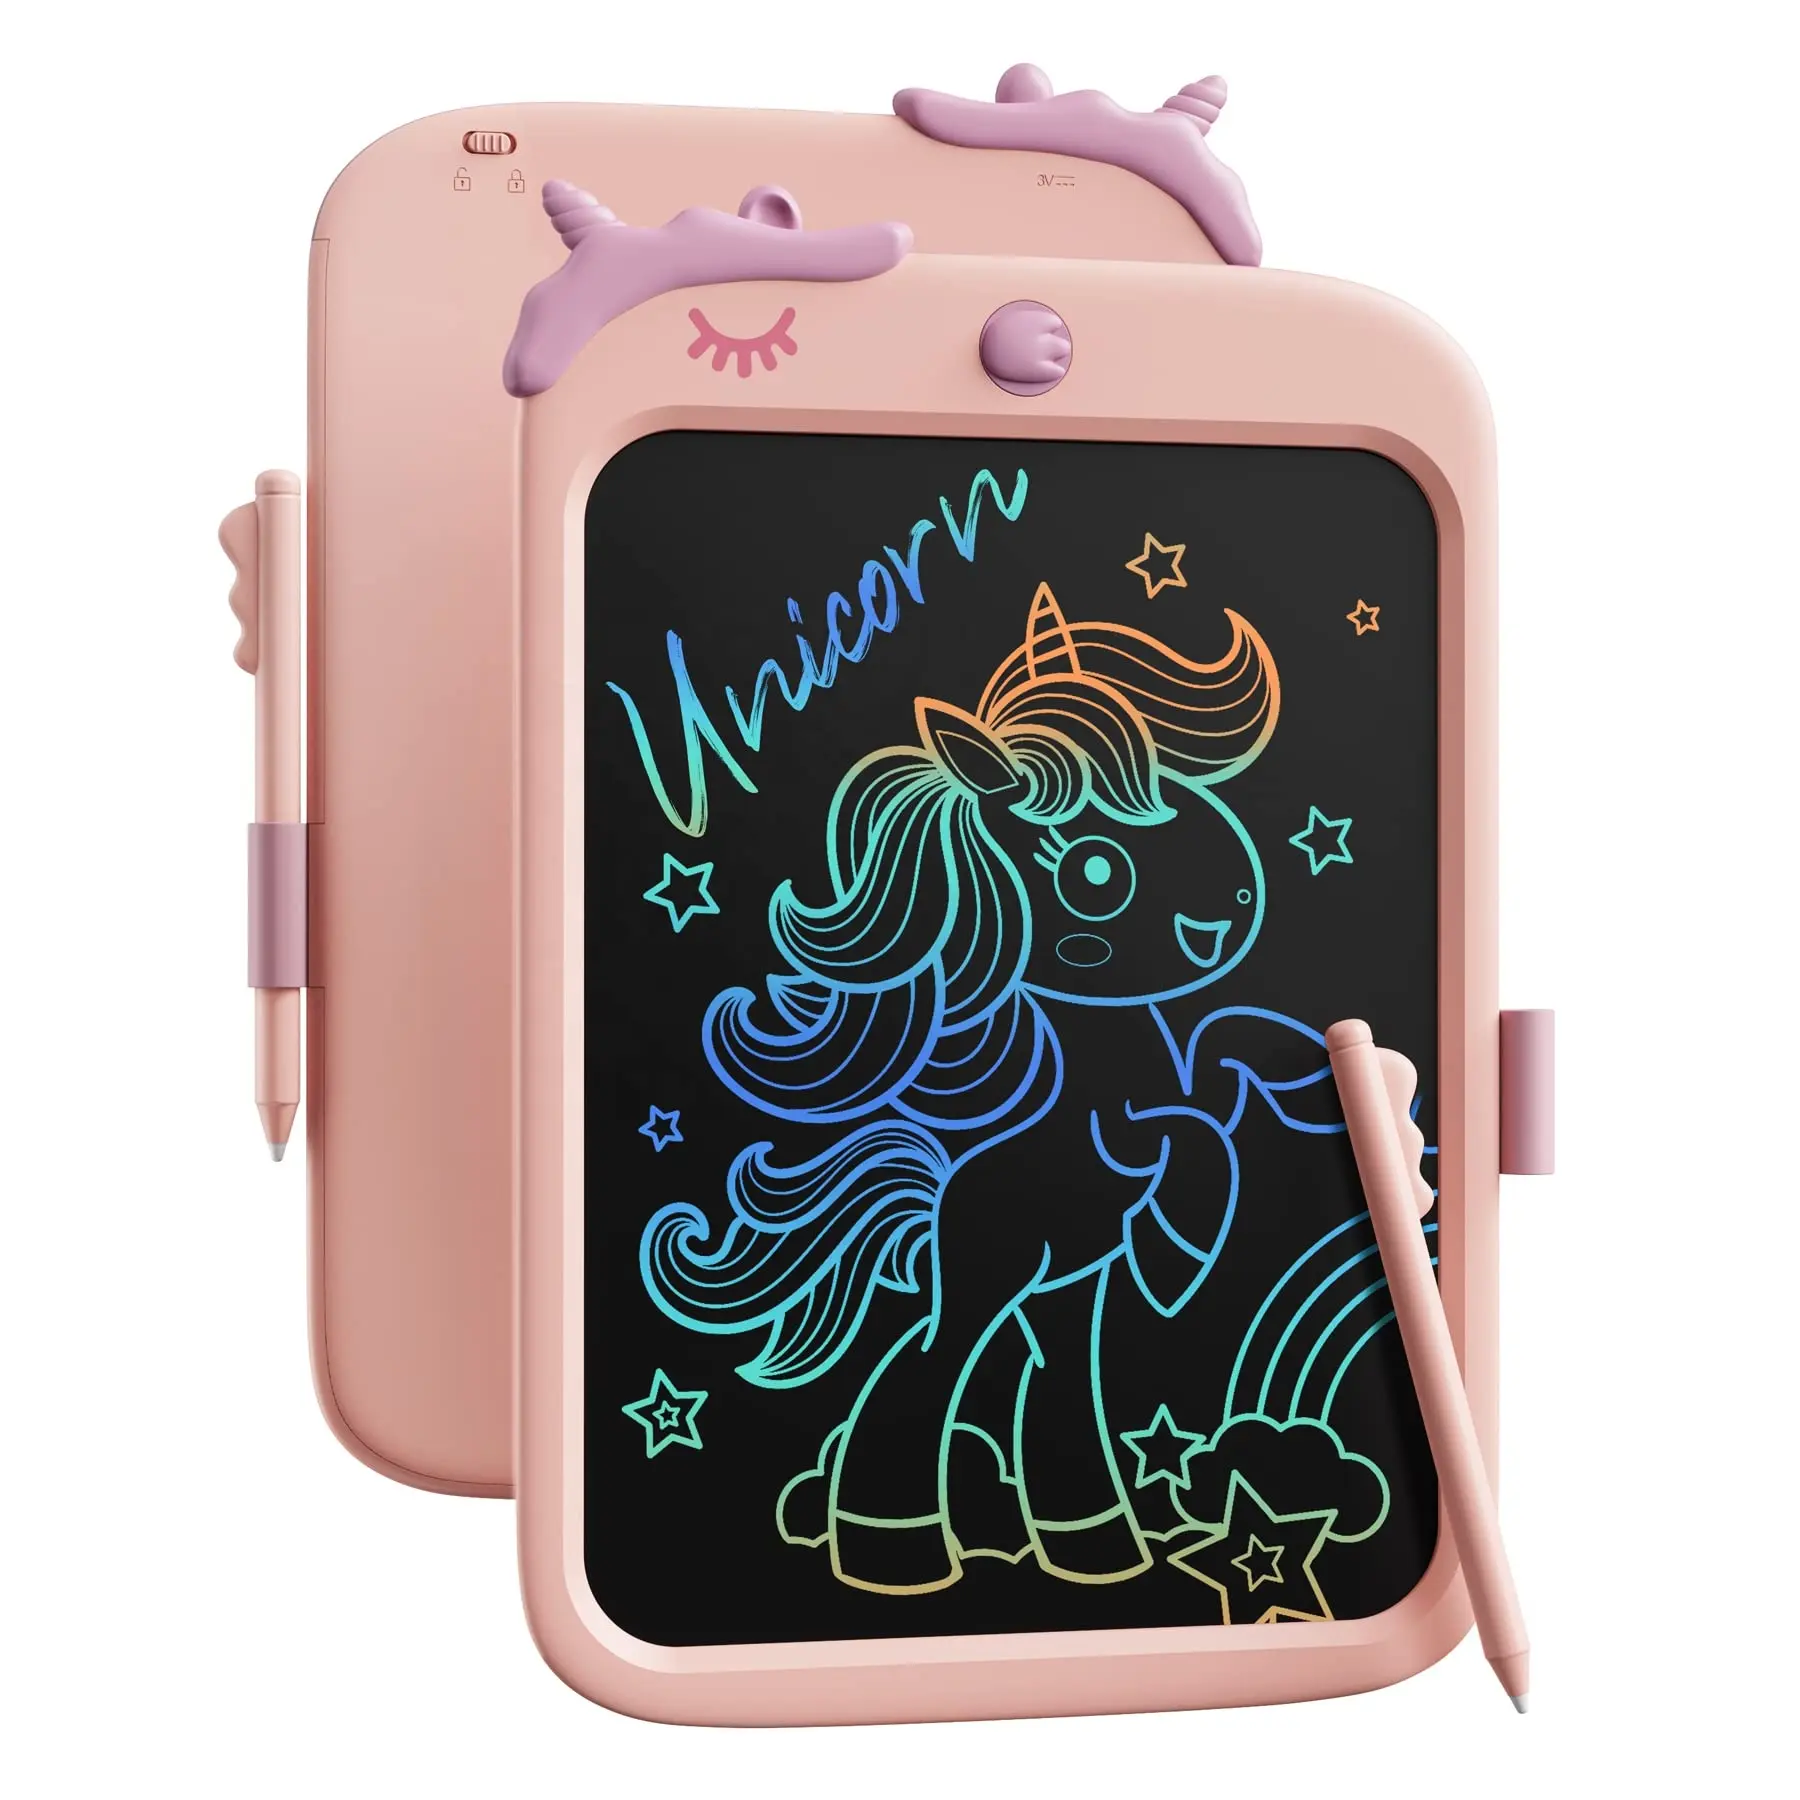 Other Educational Toys Juguetess Infantiles Lcd Writing Tablet Unicorn Baby Unicorn Educational Toy Montessori Educational Toys